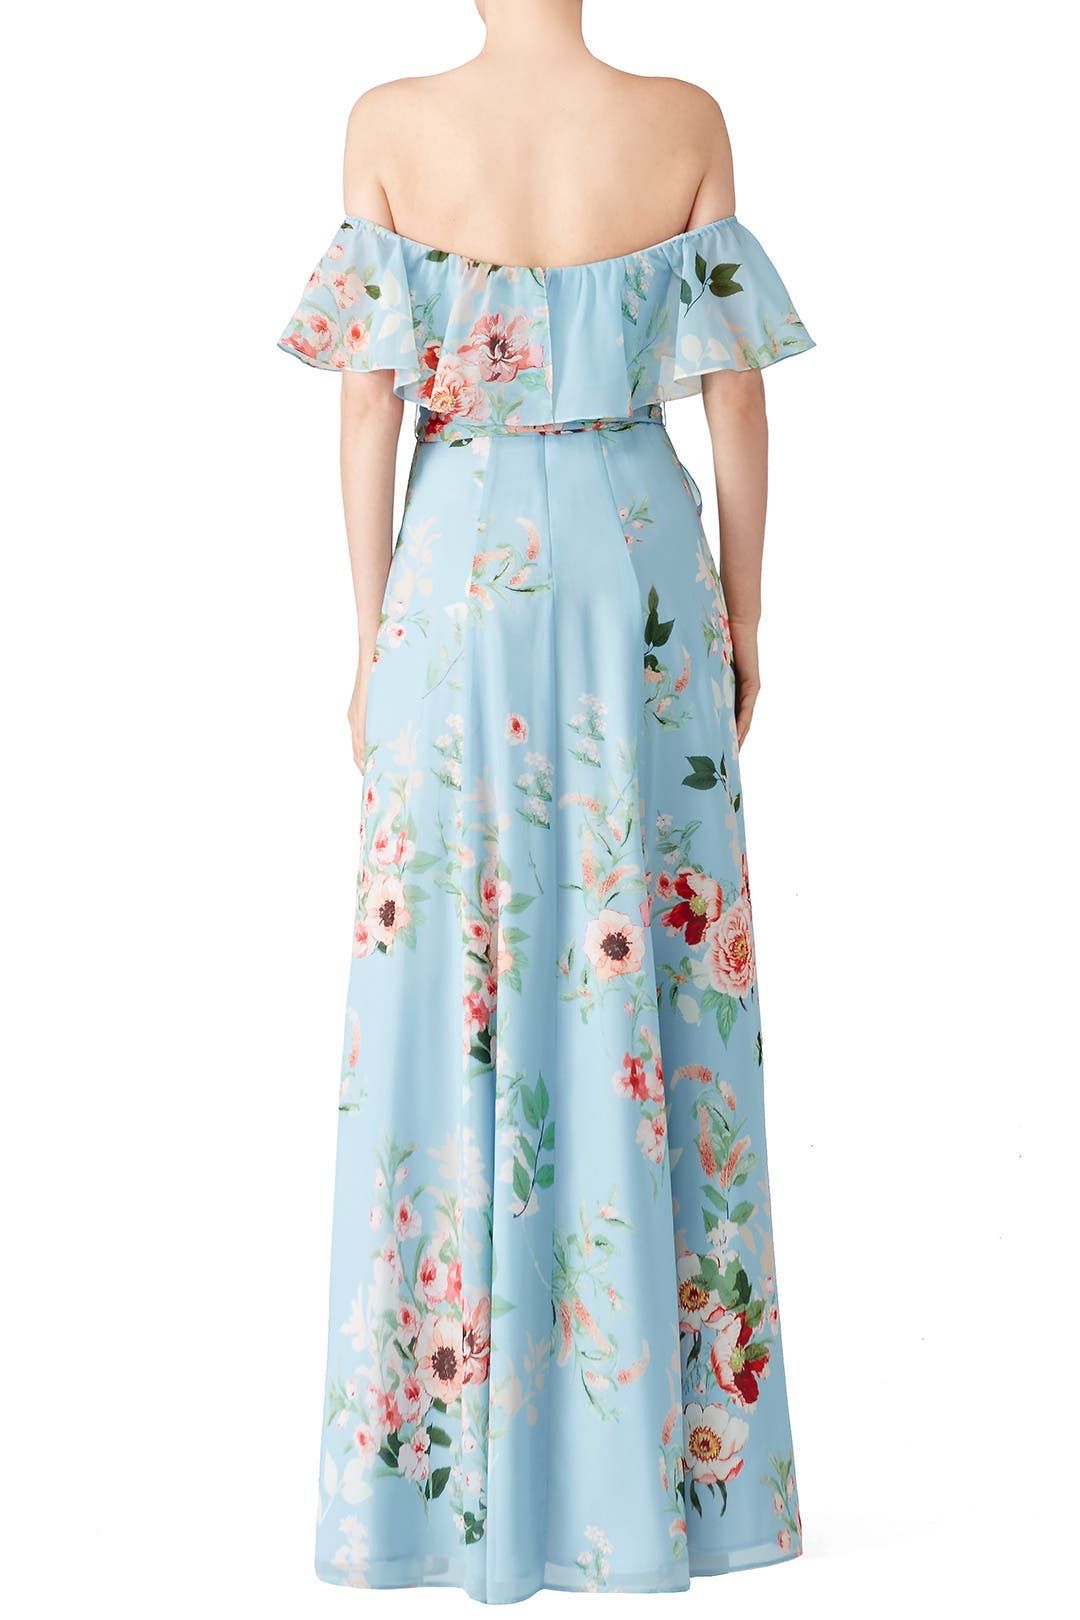 Yumi Kim Size 2 Floral Light Blue Floor Length Maxi on Queenly